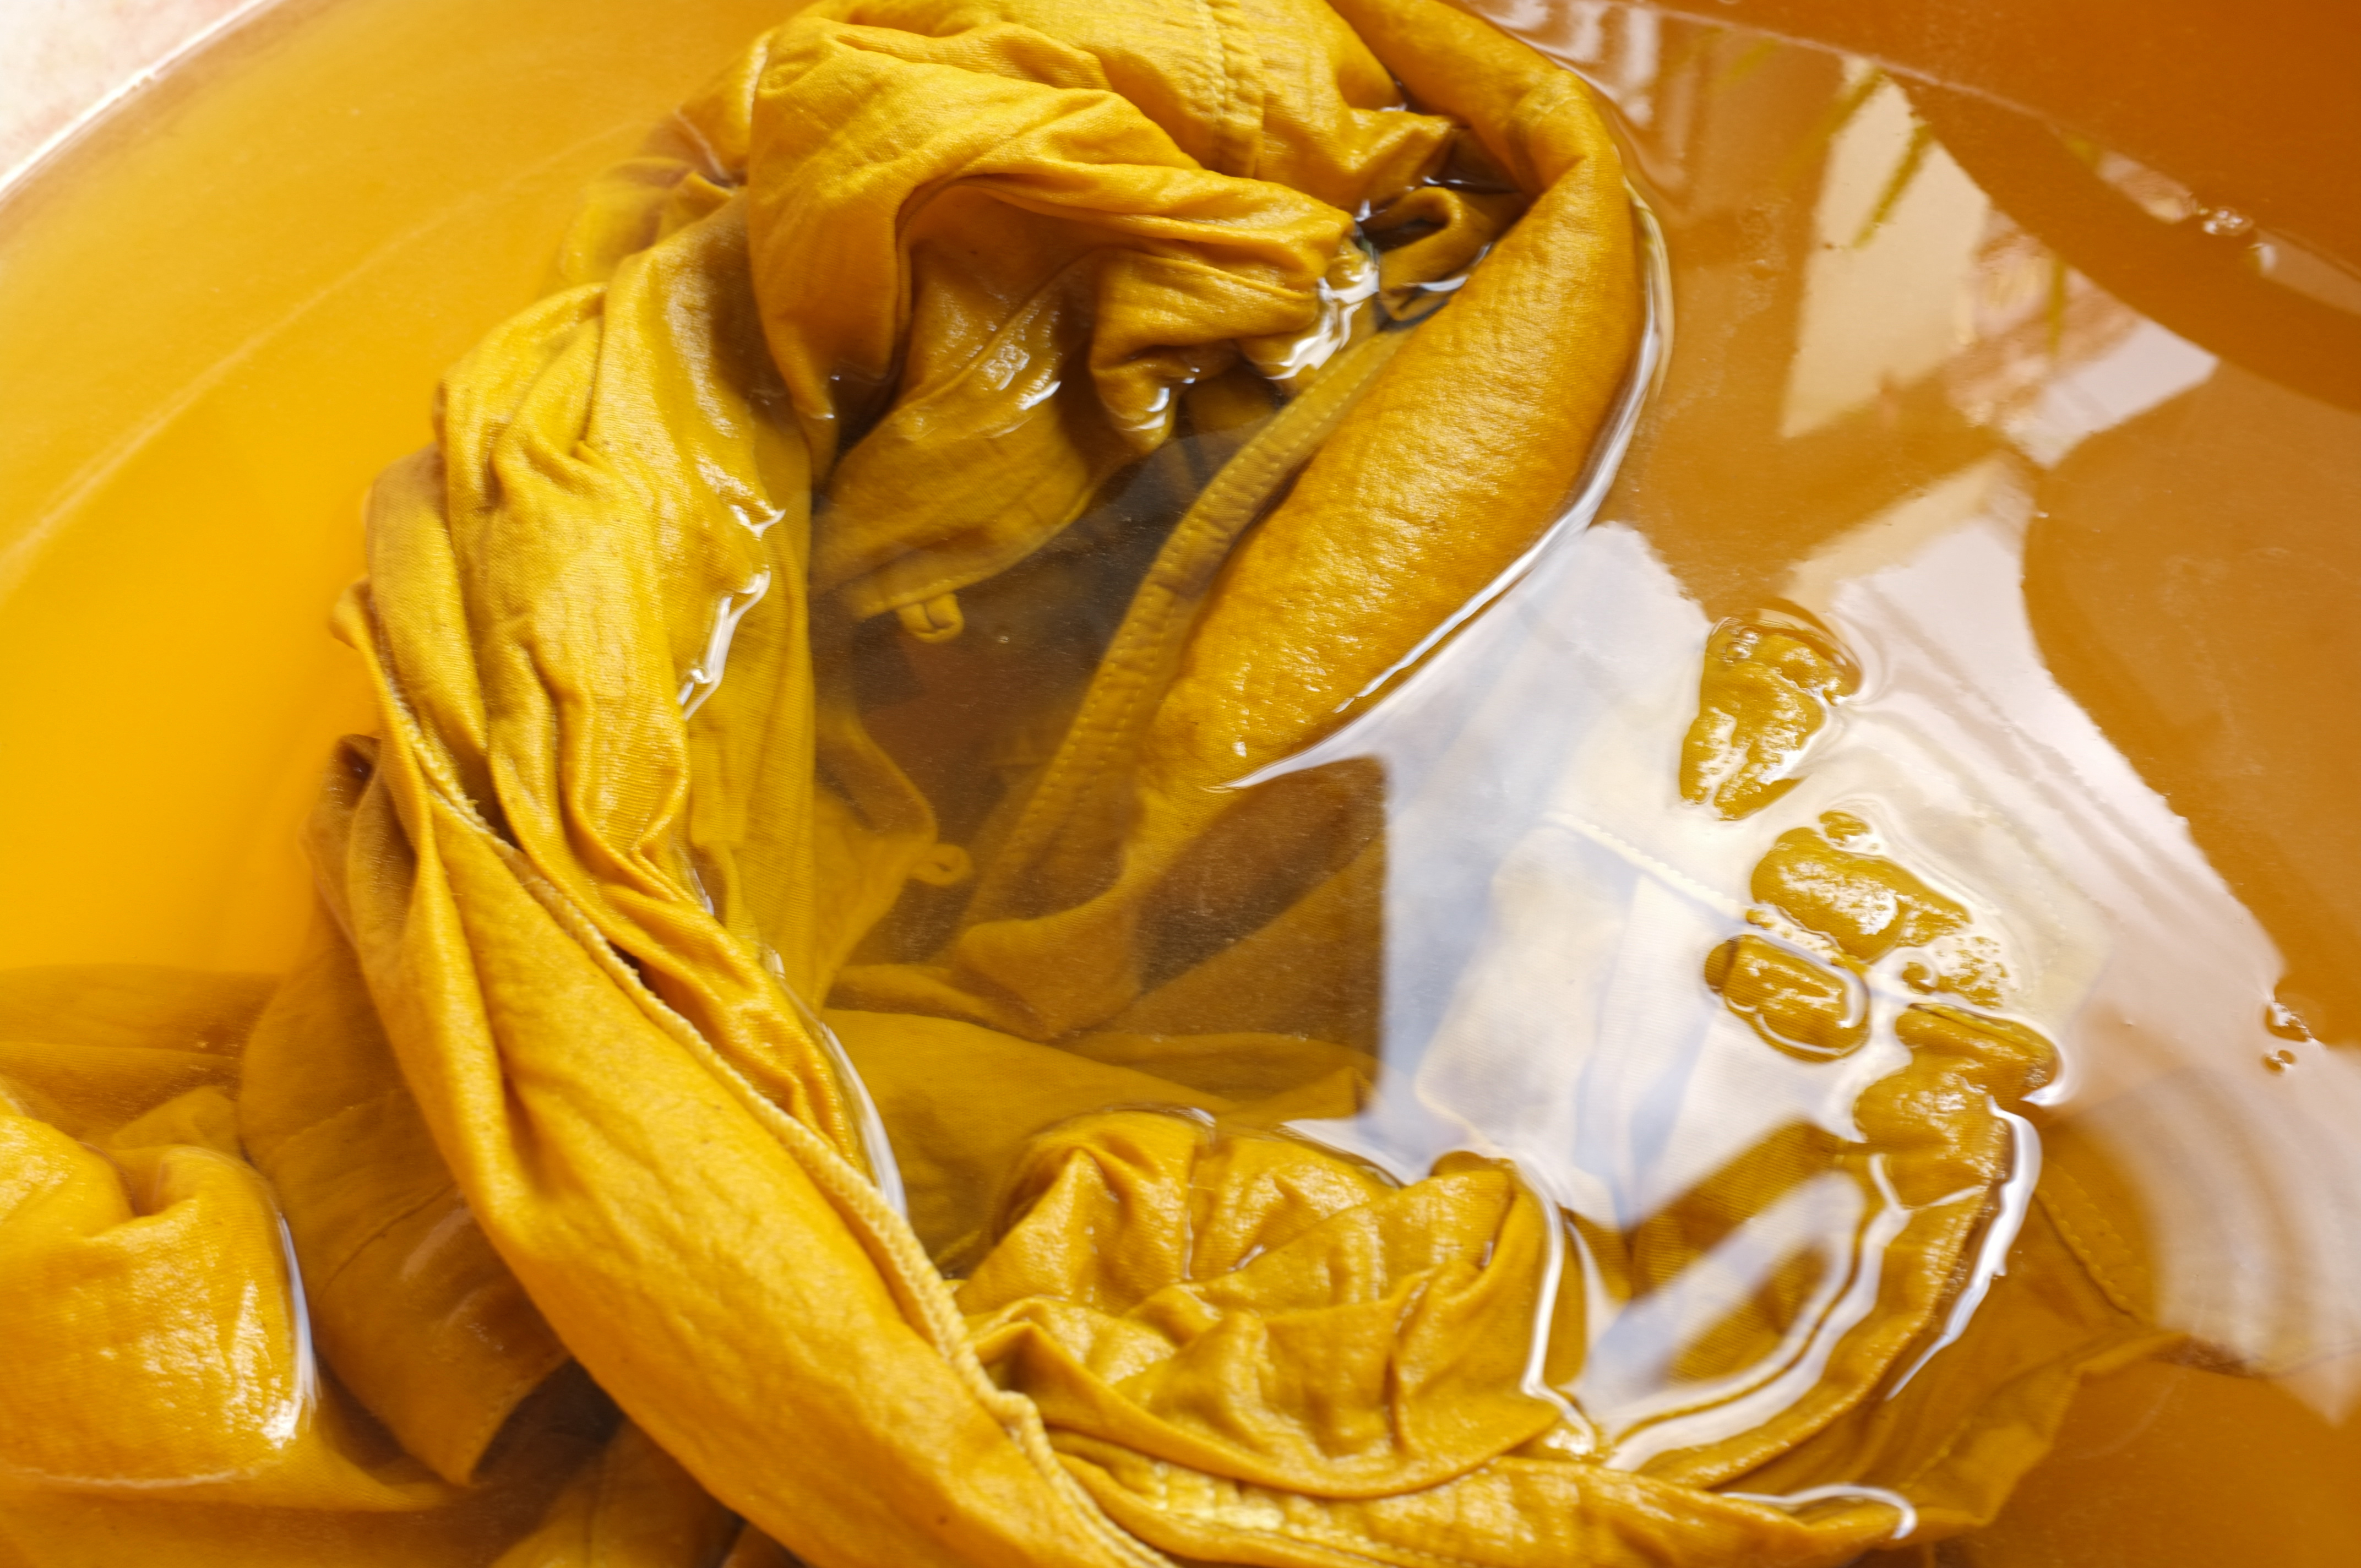 naturally dyed fabric iin water with alum powder